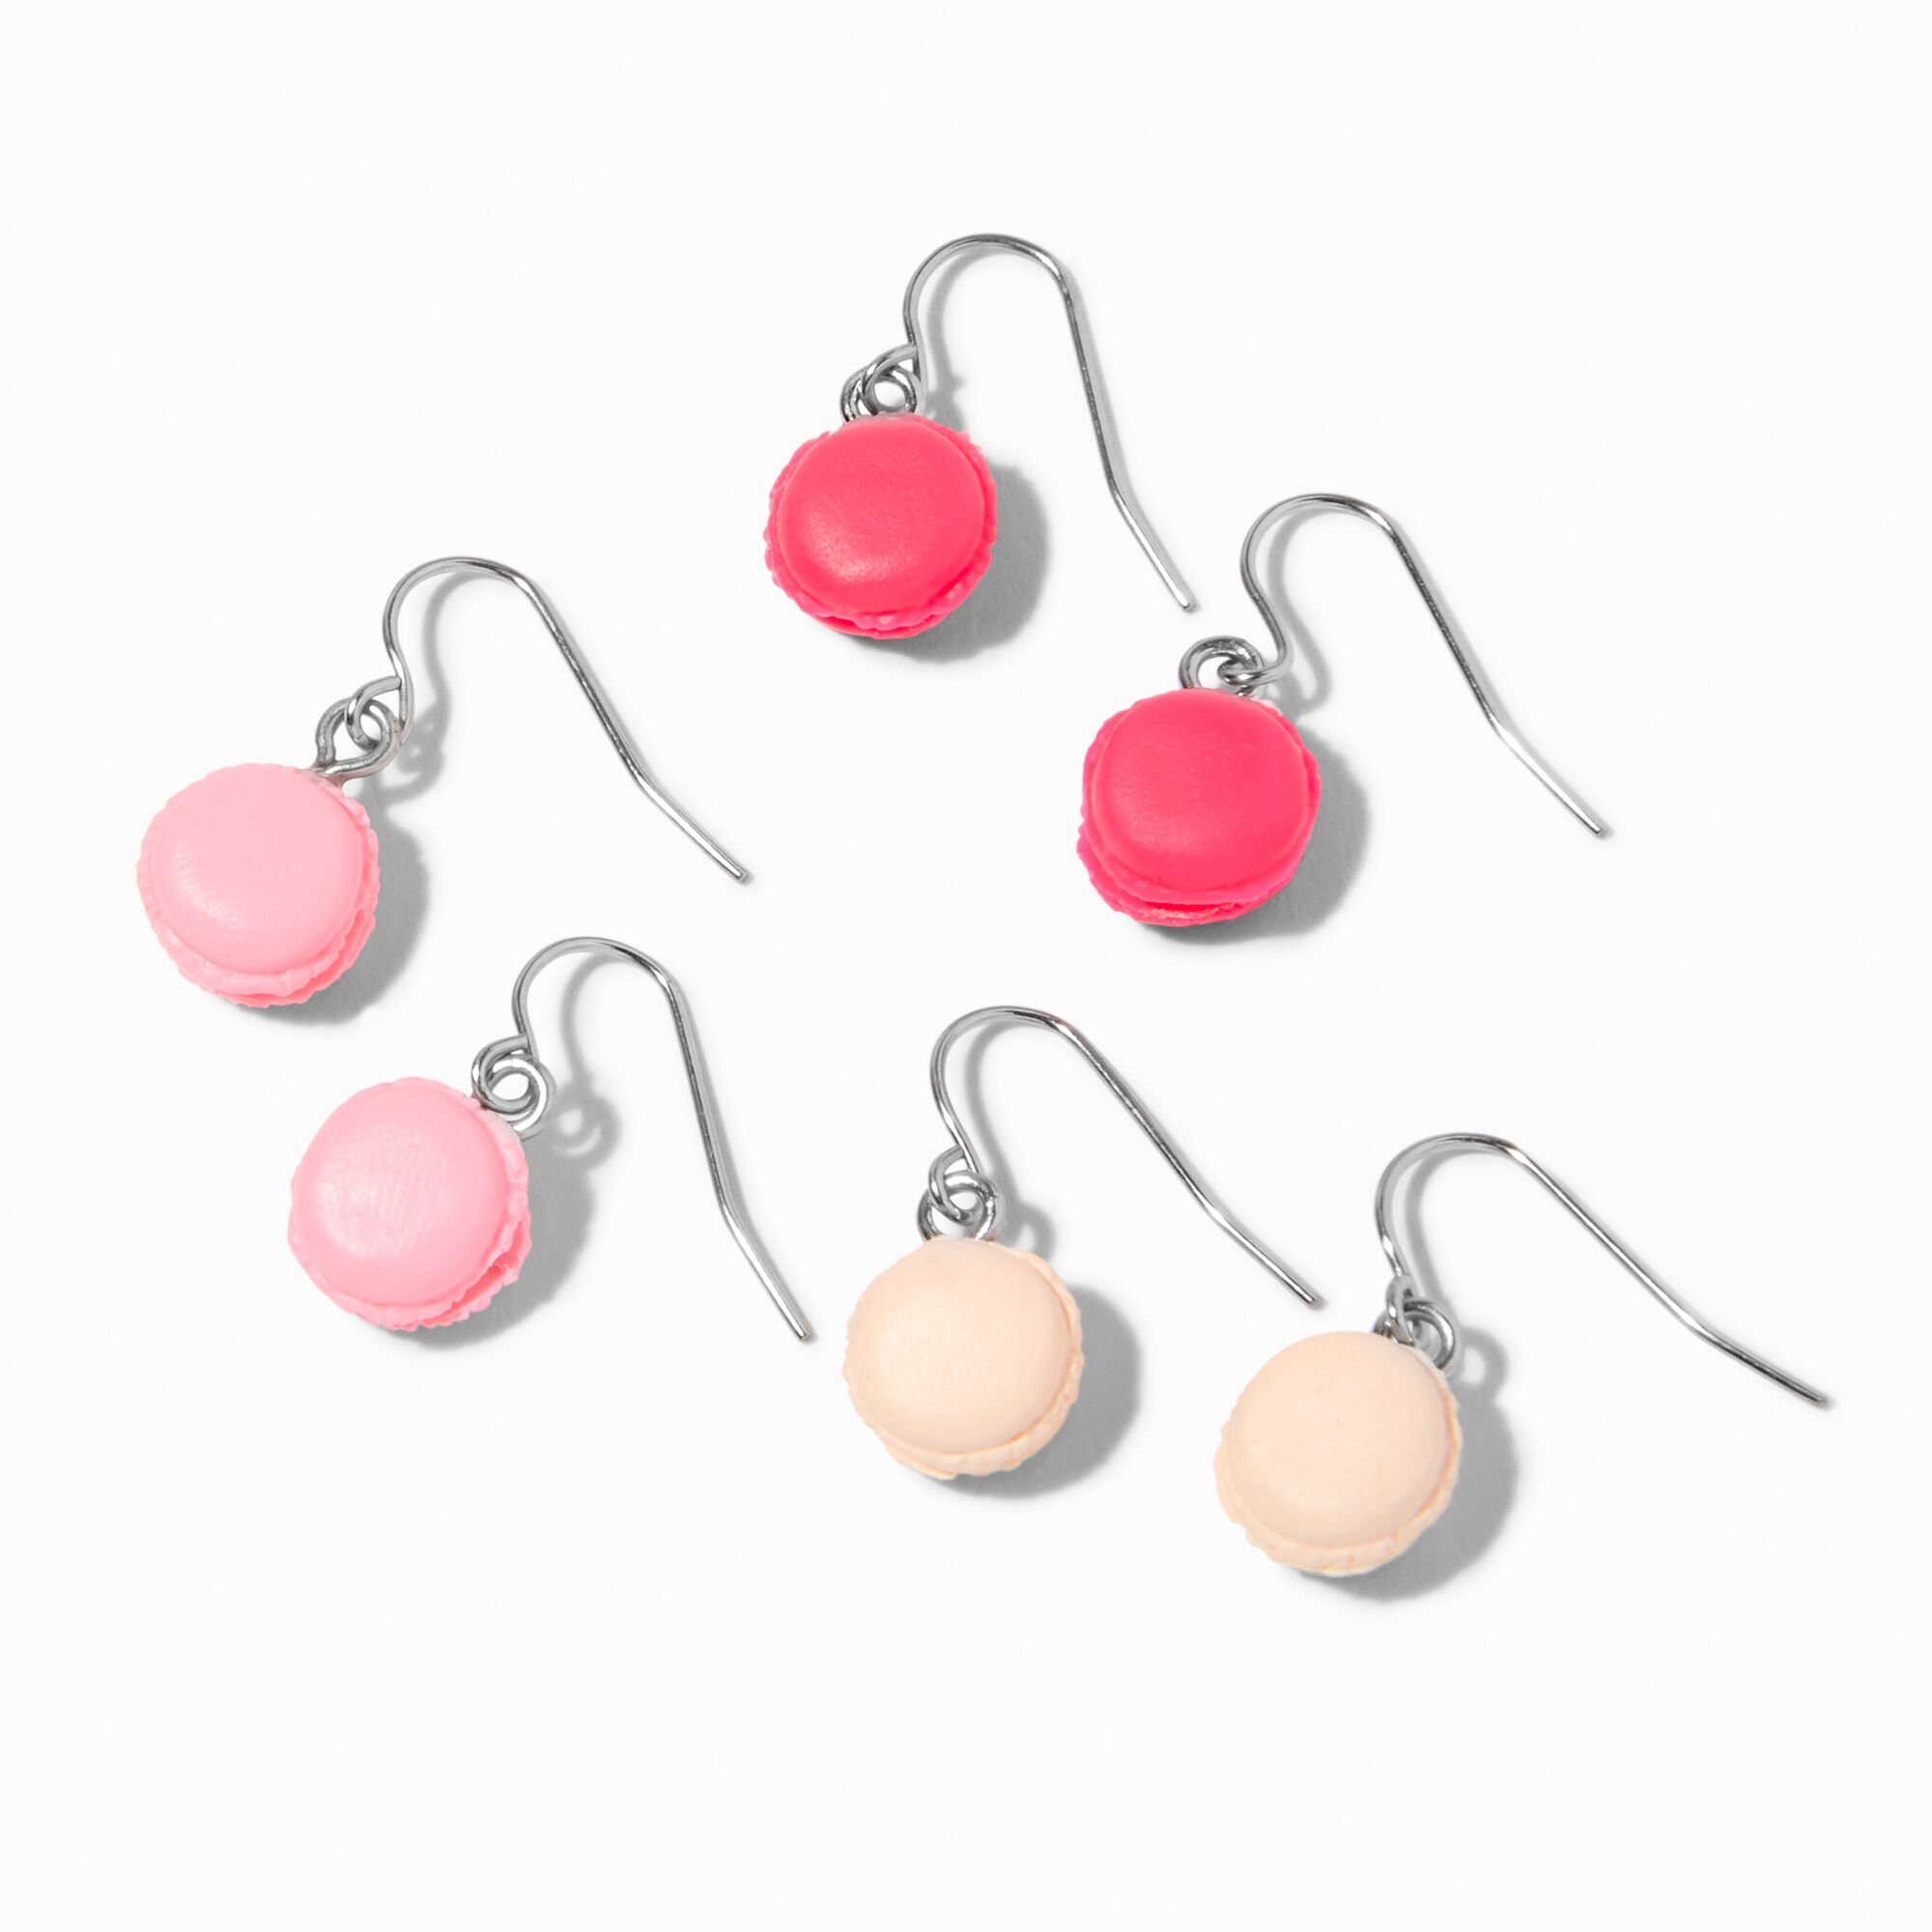 View Claires 1 Macaron Drop Earrings 3 Pack Pink information